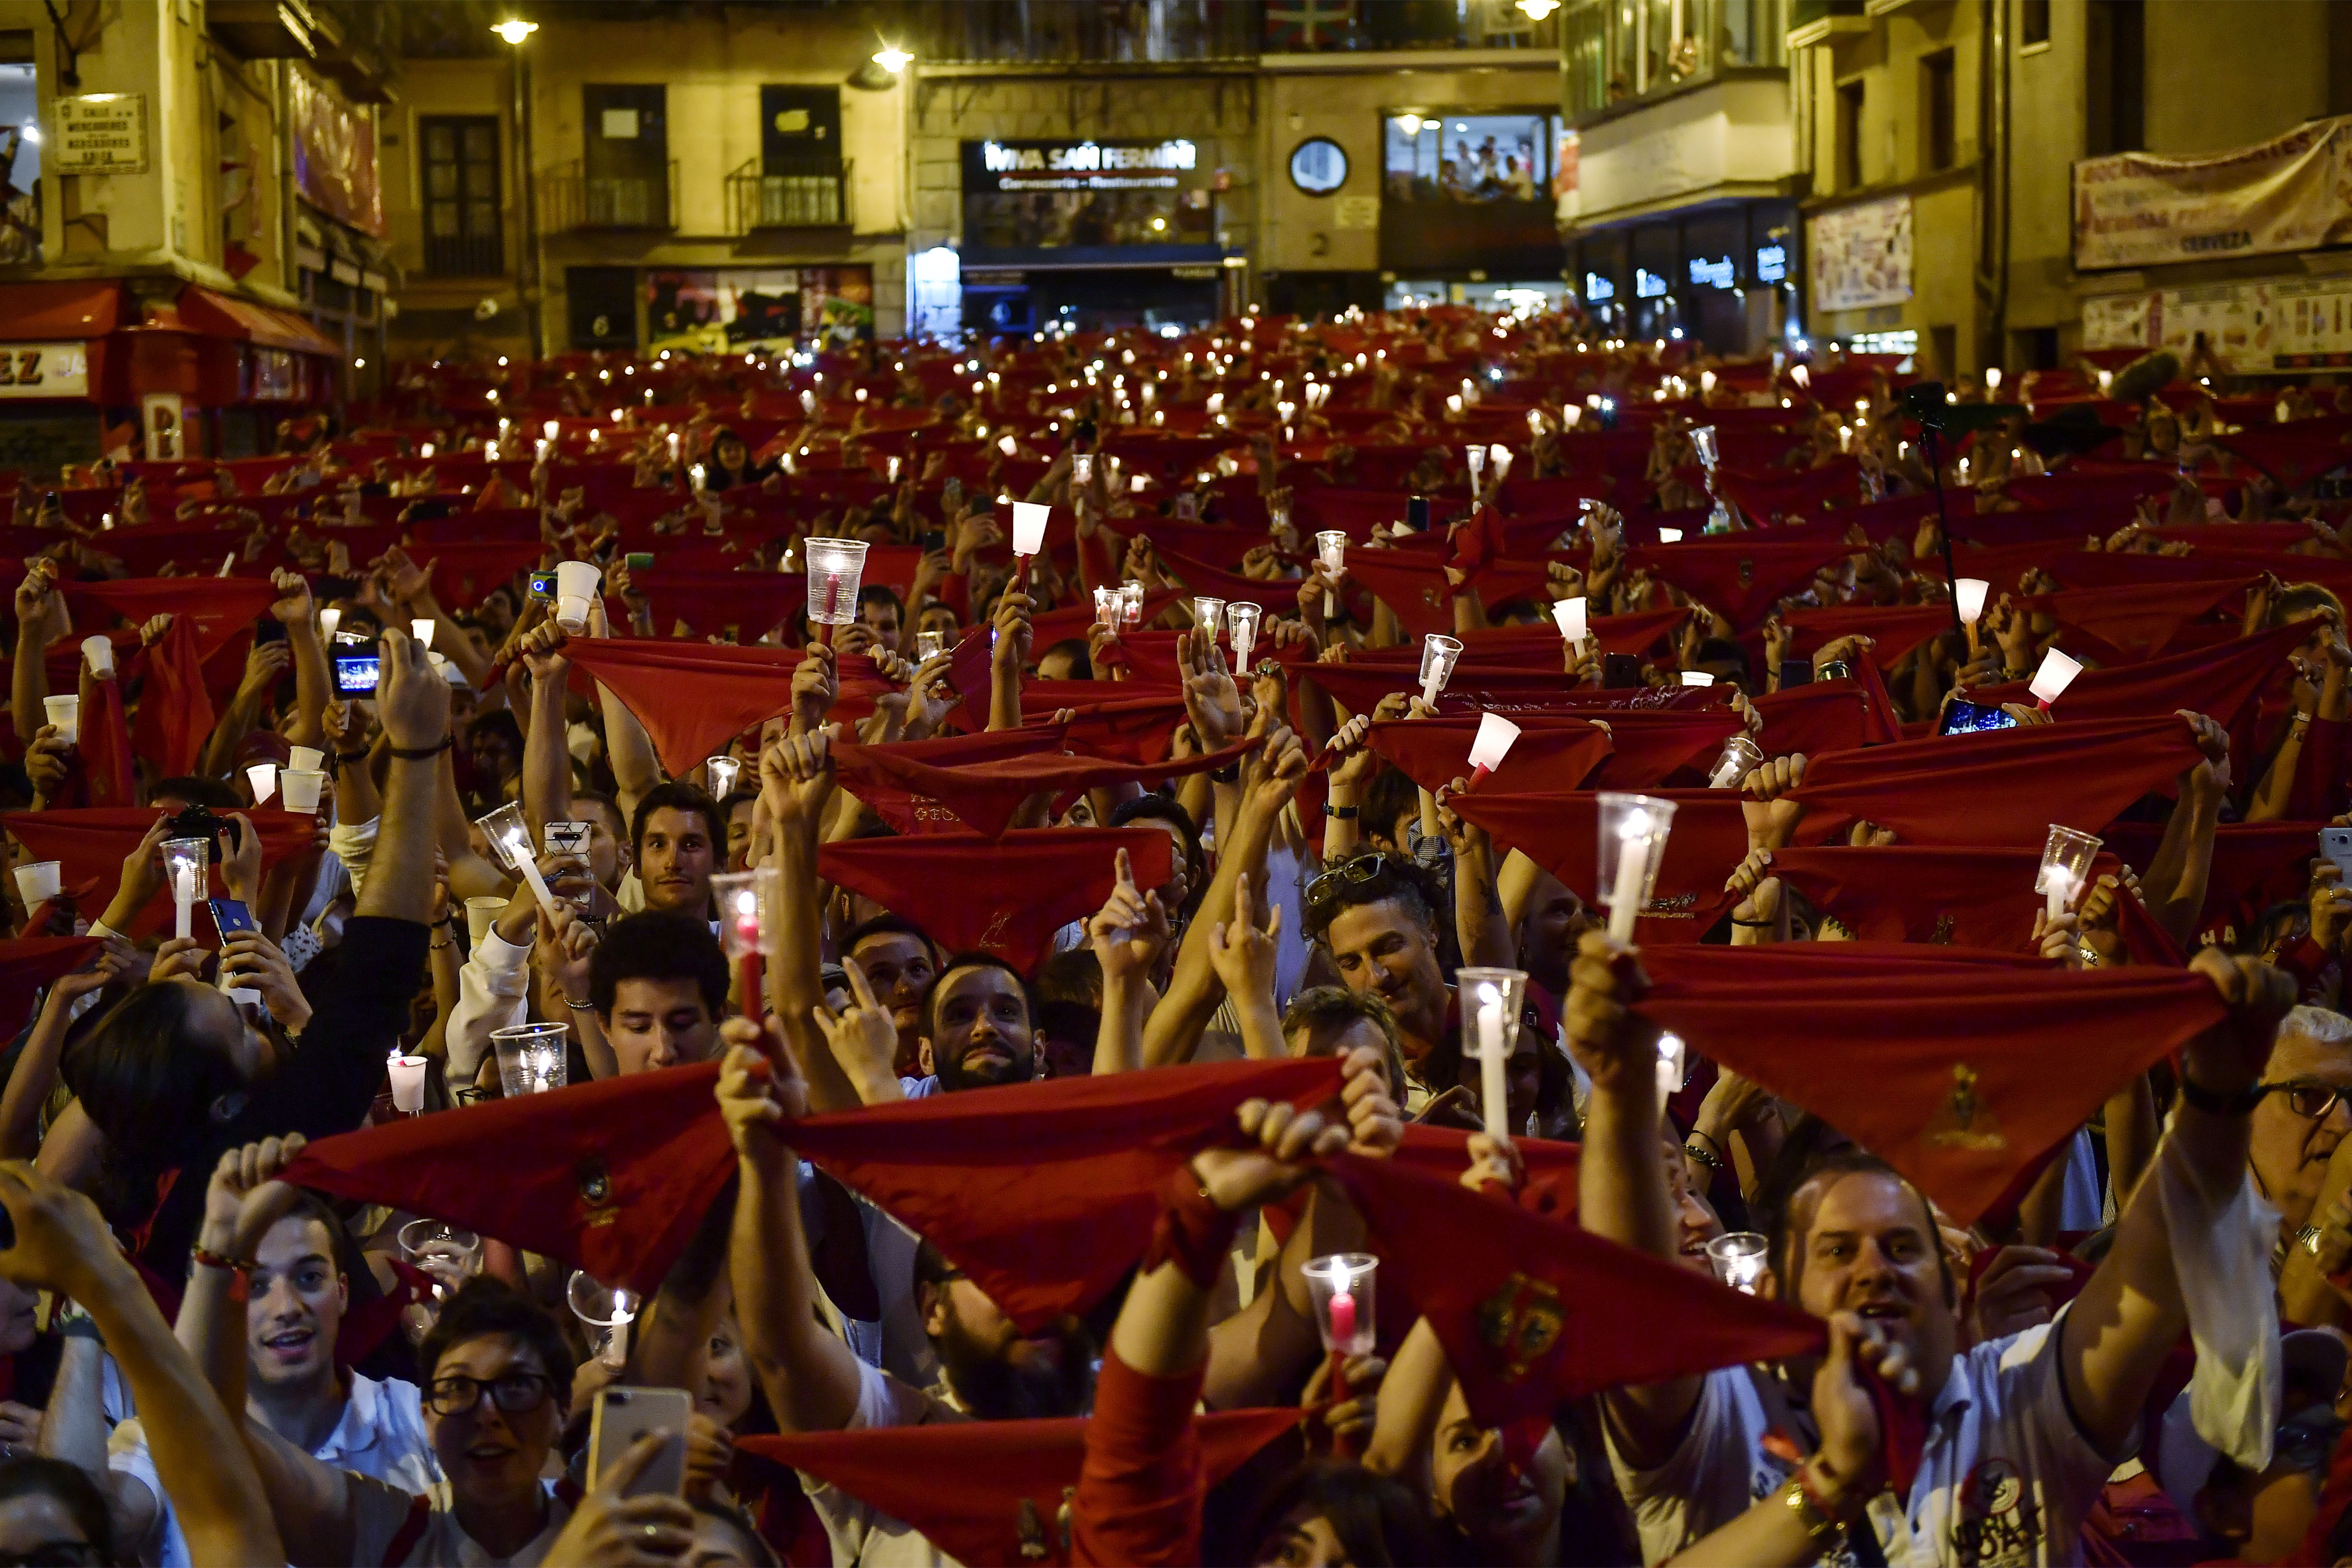 Revelers hold candles and red kerchief after singing a song ''Pobre de Mi'' to close nine days of the running of the bulls, music and dance at the San Fermin Festival, in Pamplona, northern Spain, Monday, July 15, 2019. (AP Photo/Alvaro Barrientos)